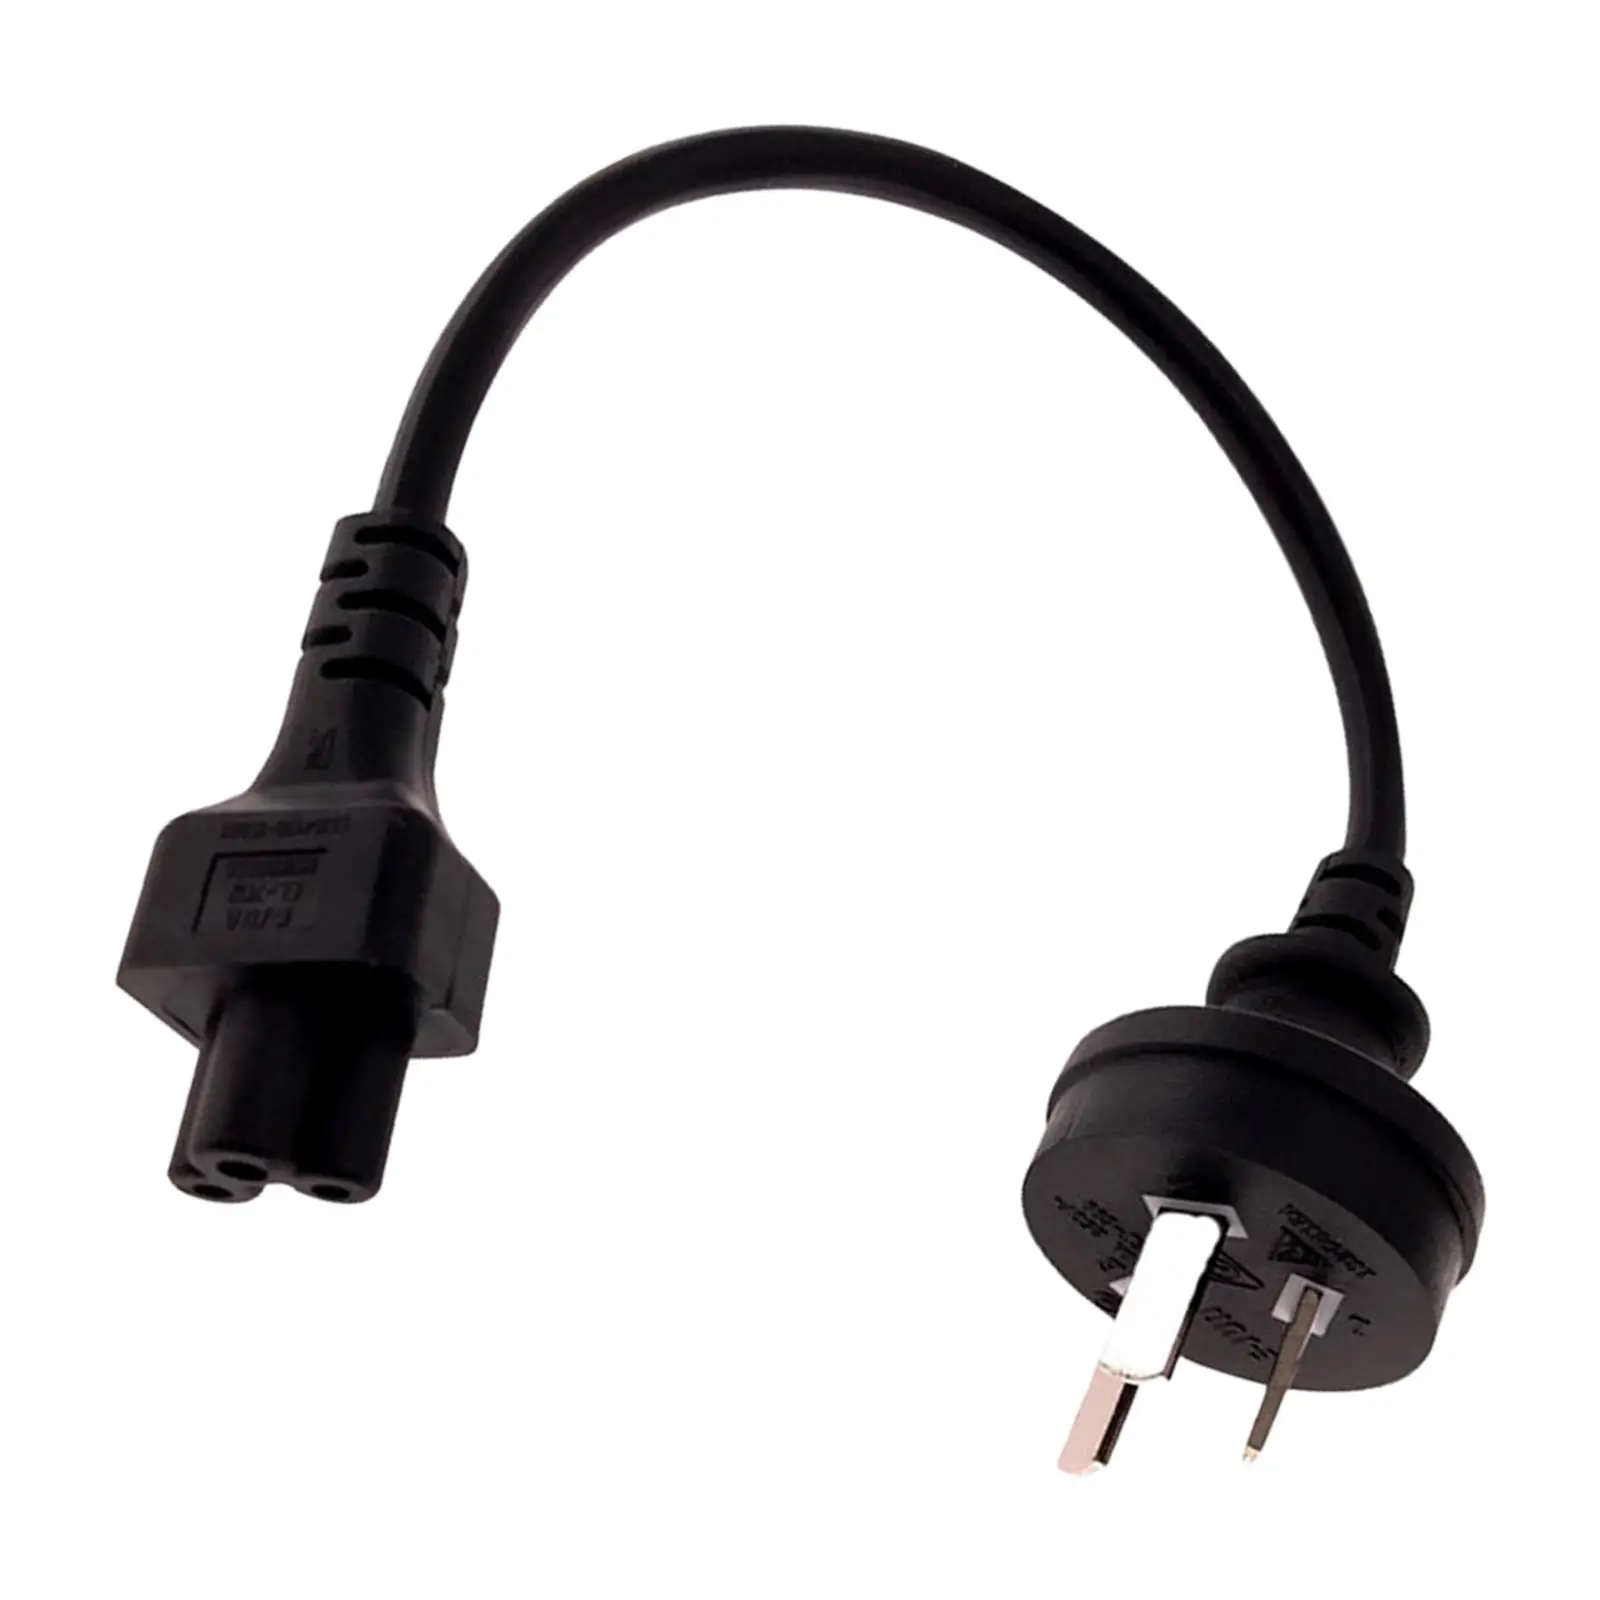 Power Cable Adapter AU Plug to  1.8M Easily Install ,Black Direct Replaces Durable